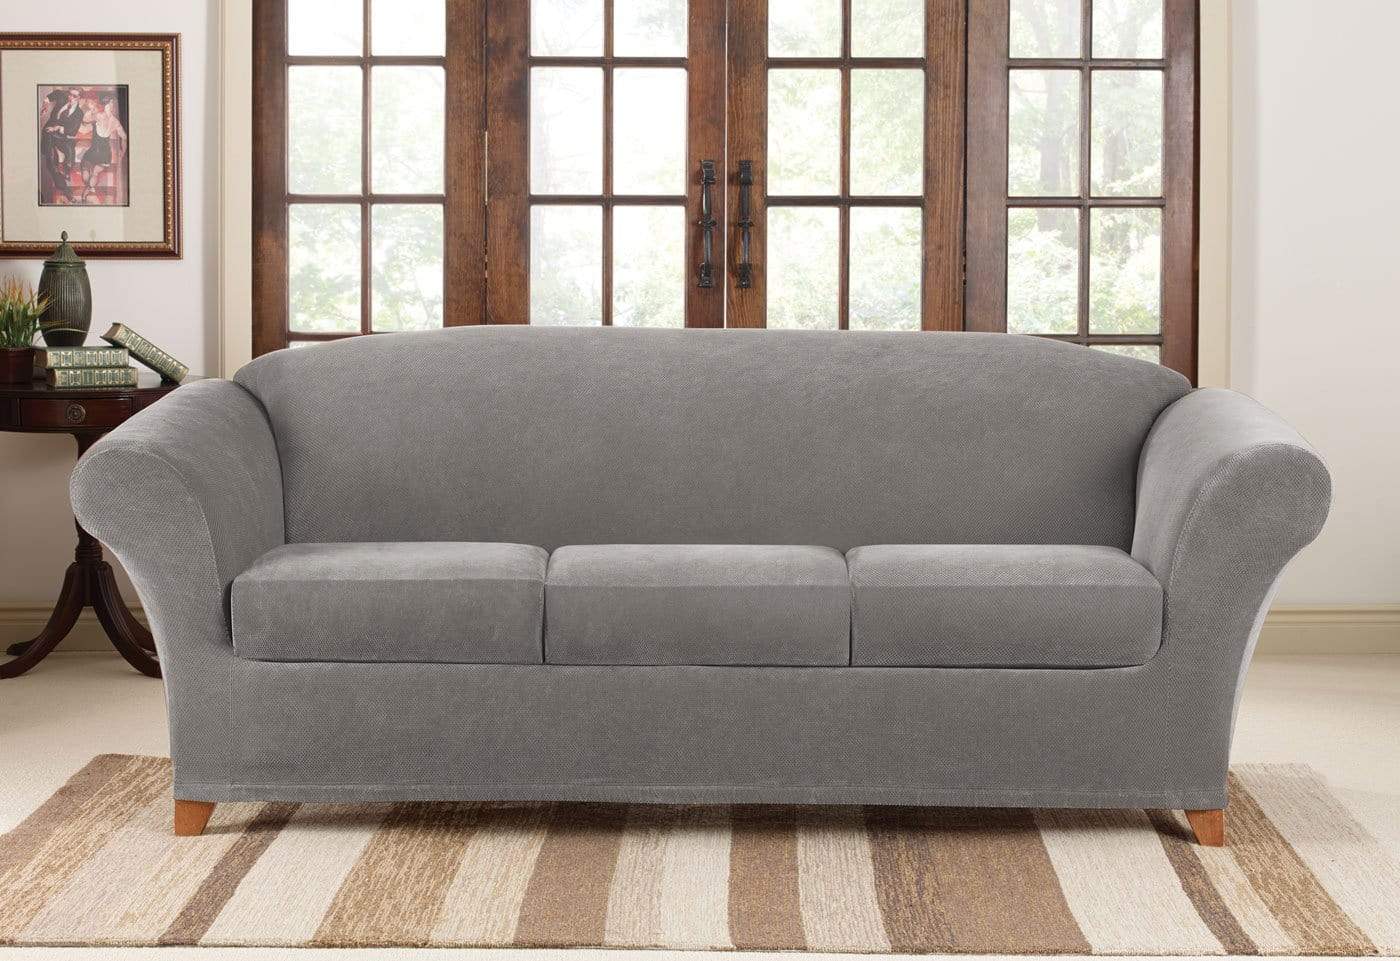 SureFit Stretch Piqué Four Piece Sofa Slipcover   Form Fit   Individual Cushion Covers   Machine Washable in Flannel Grey